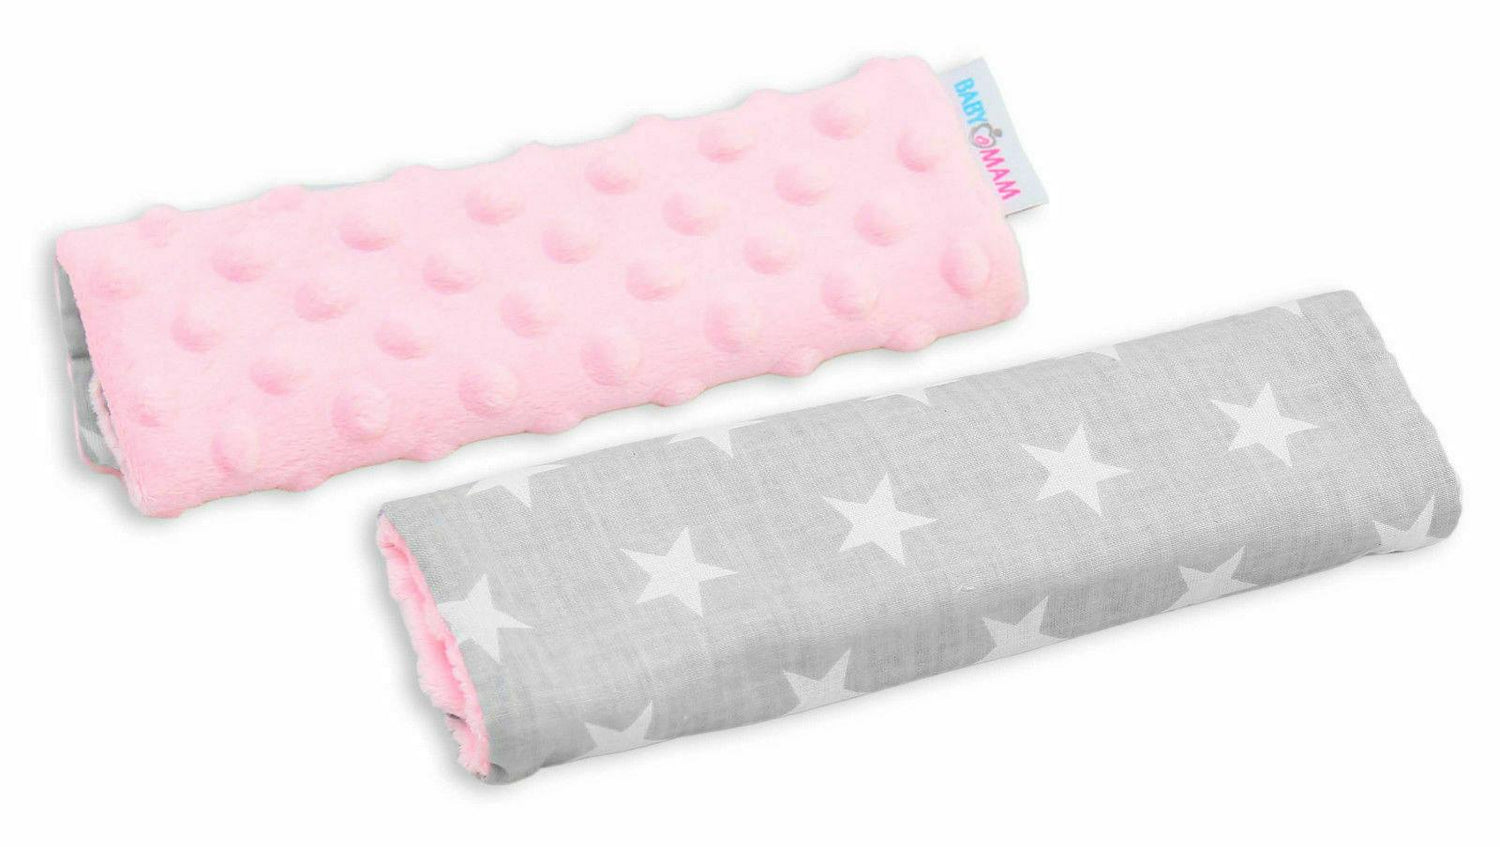 Dimple Belt Cover Car Seat Pram Pad Shoulder Soft Strap 2 Piece Pink/Small White Stars On Grey Happybaby